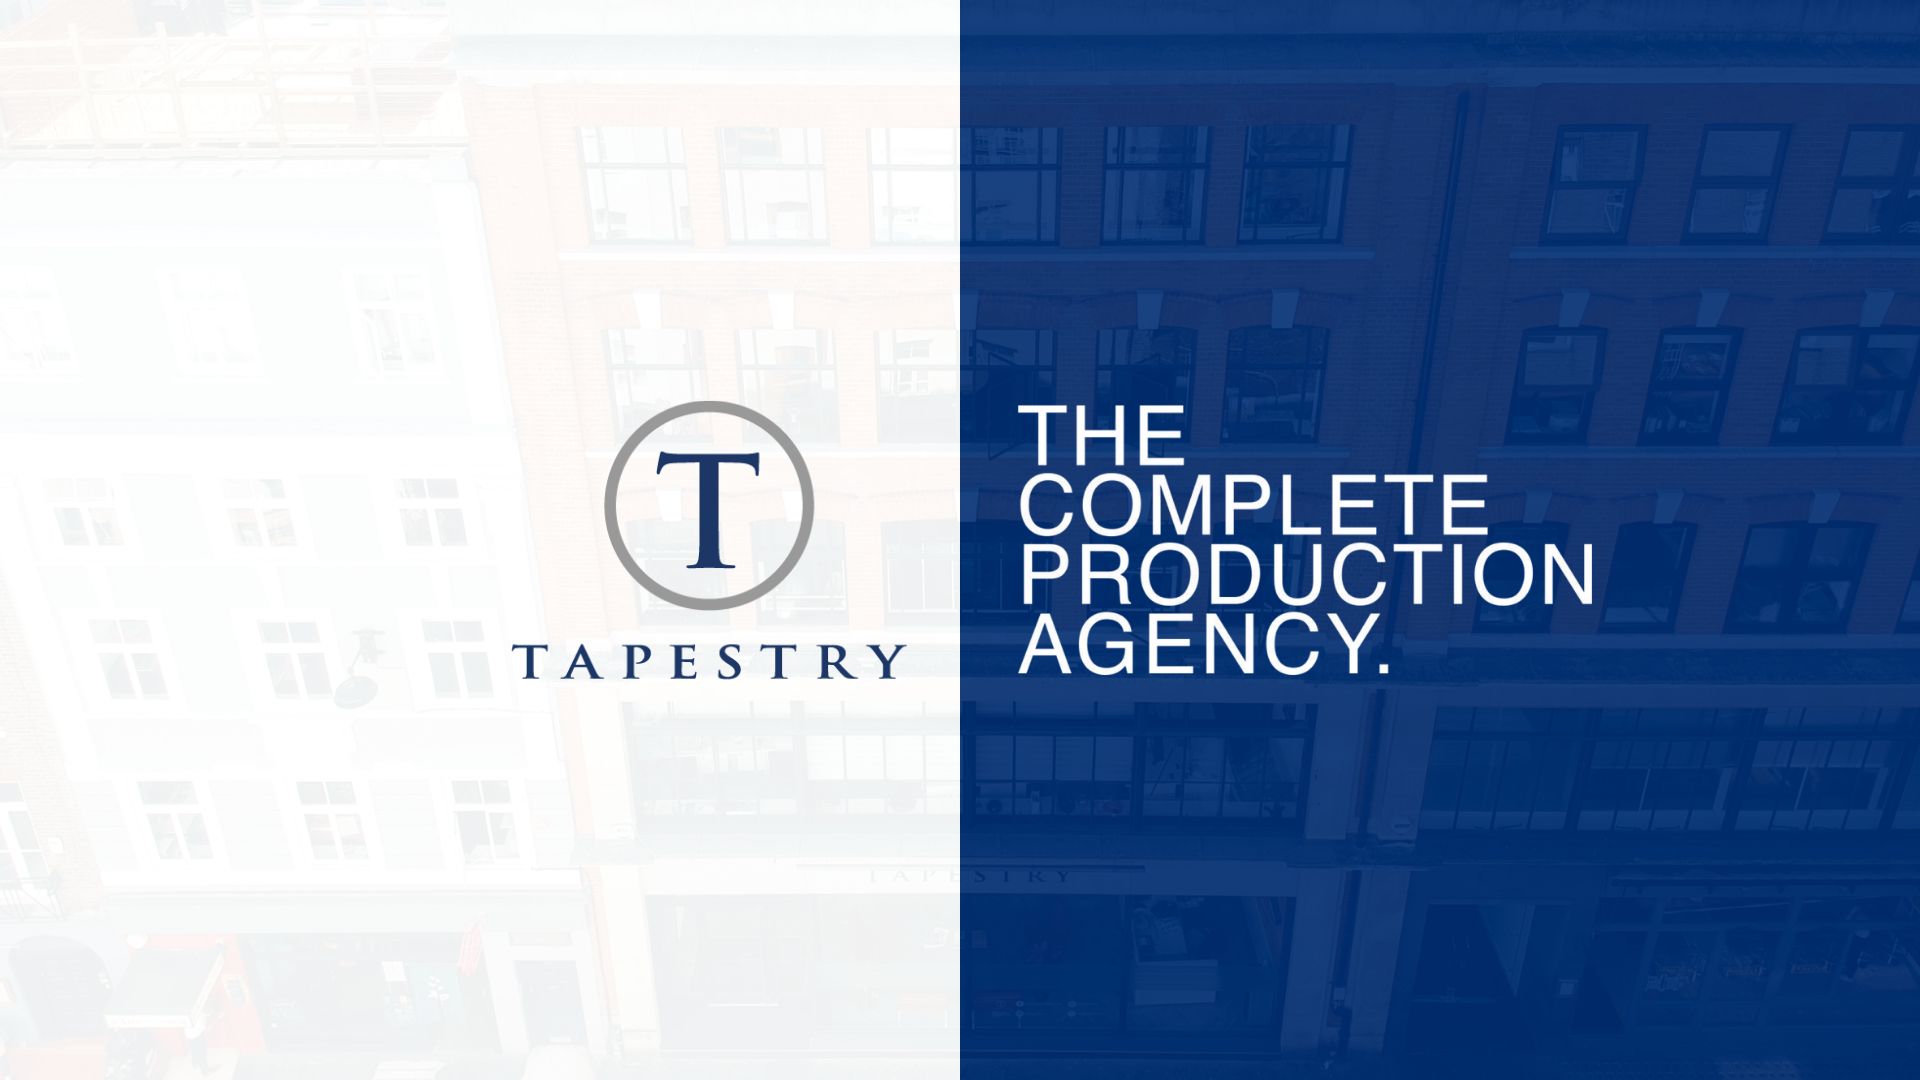 Tapestry-soho-frith-production-agency-house-london-midwinter-new-year-brochure-updated-2024-photography-retouching-publishing-artworking-advertising-complete-services-campaigns